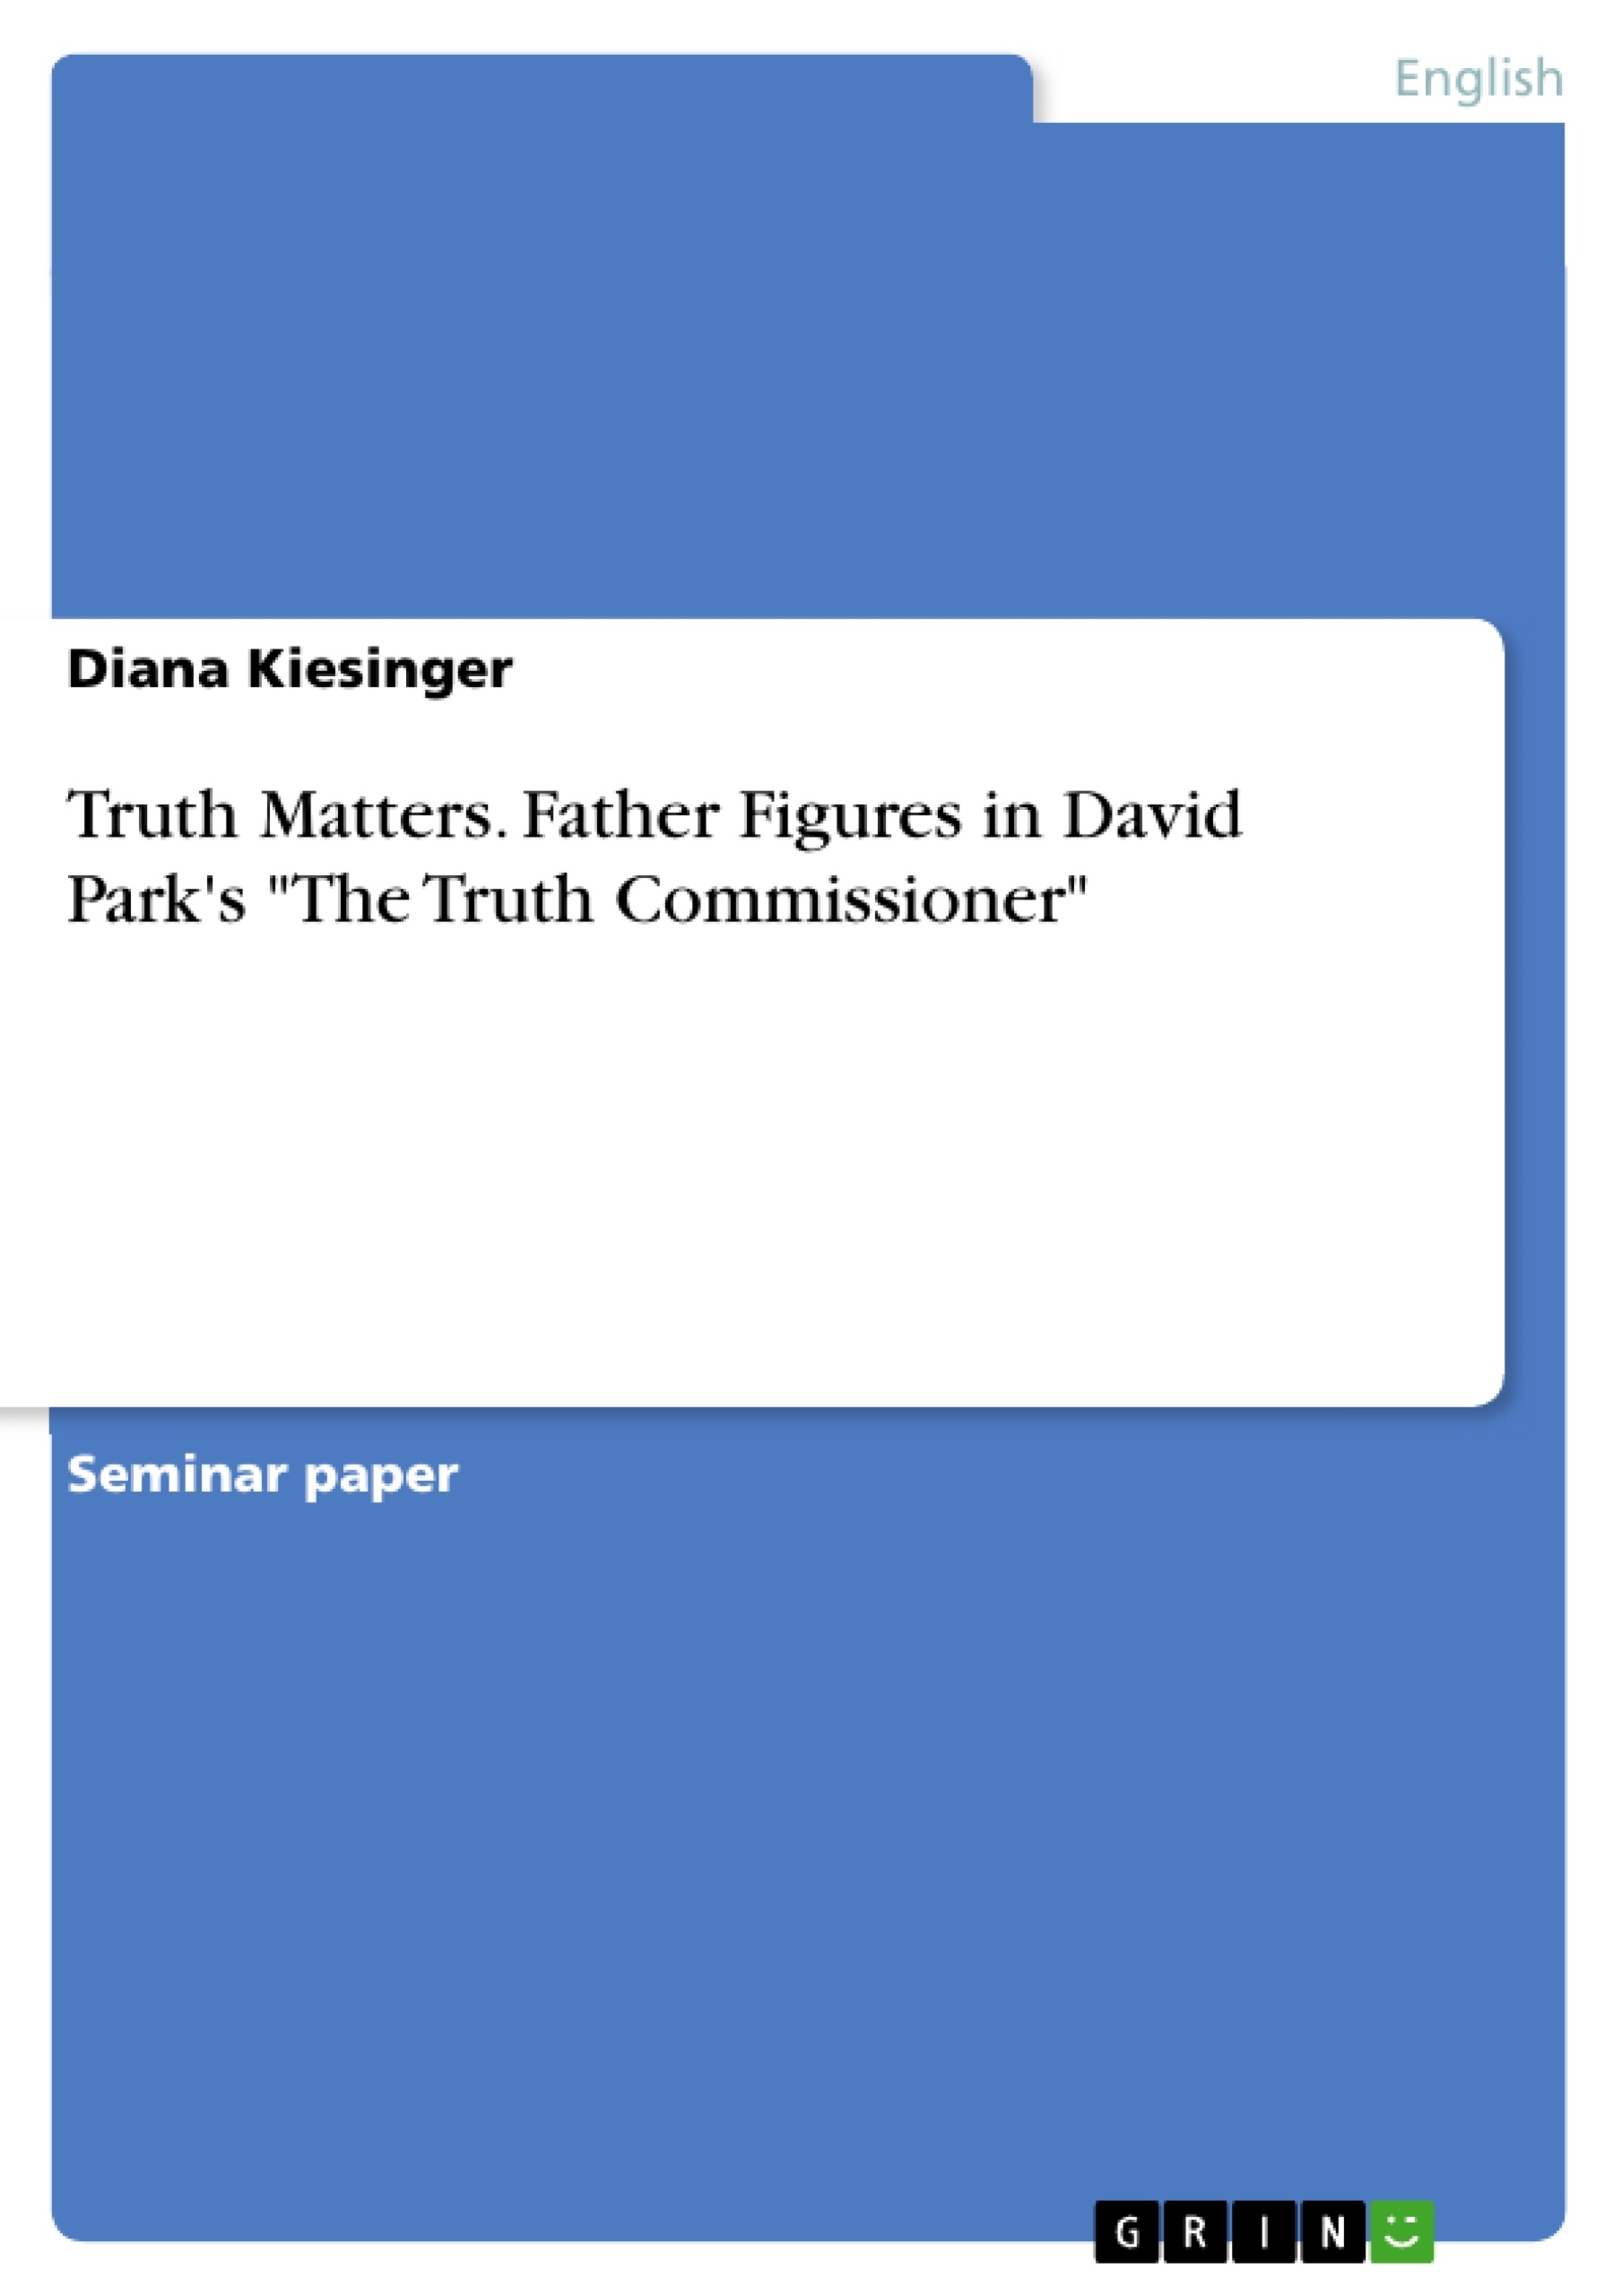 Titel: Truth Matters. Father Figures in David Park's "The Truth Commissioner"